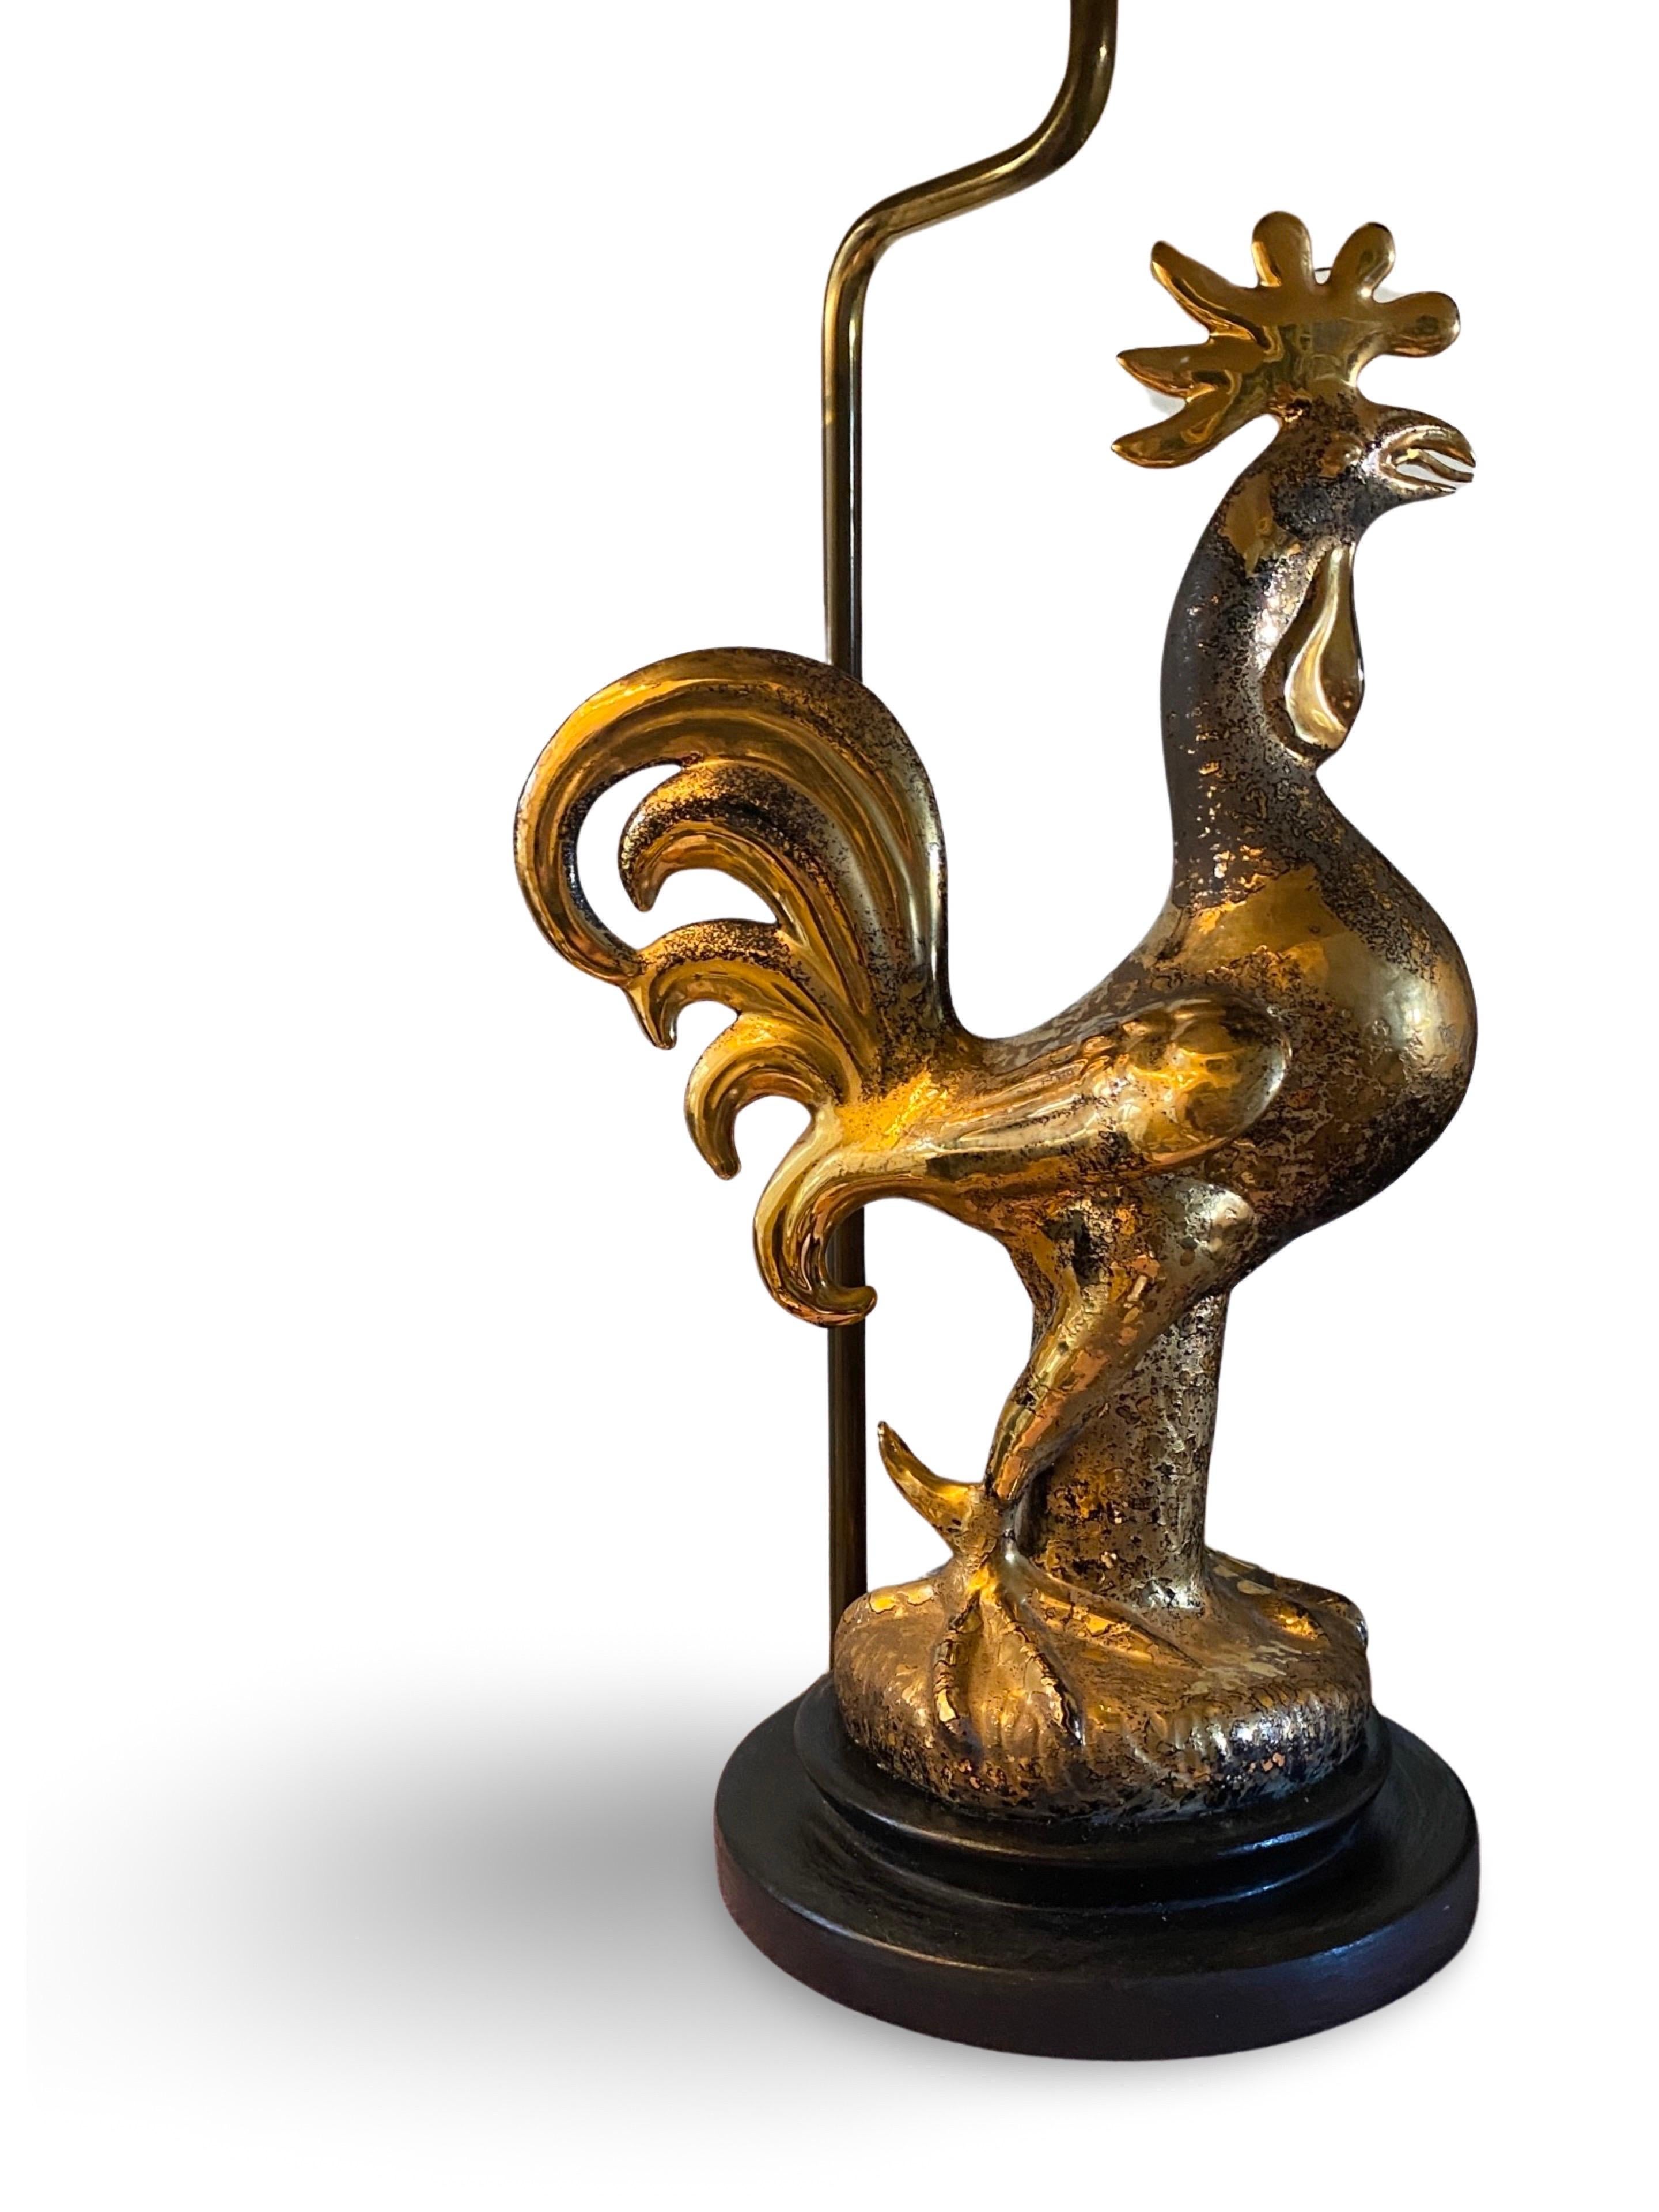 Ceramic Sascha Brastoff One of a Kind Gold Plated and Black Rooster Table Lamp  Signed  For Sale